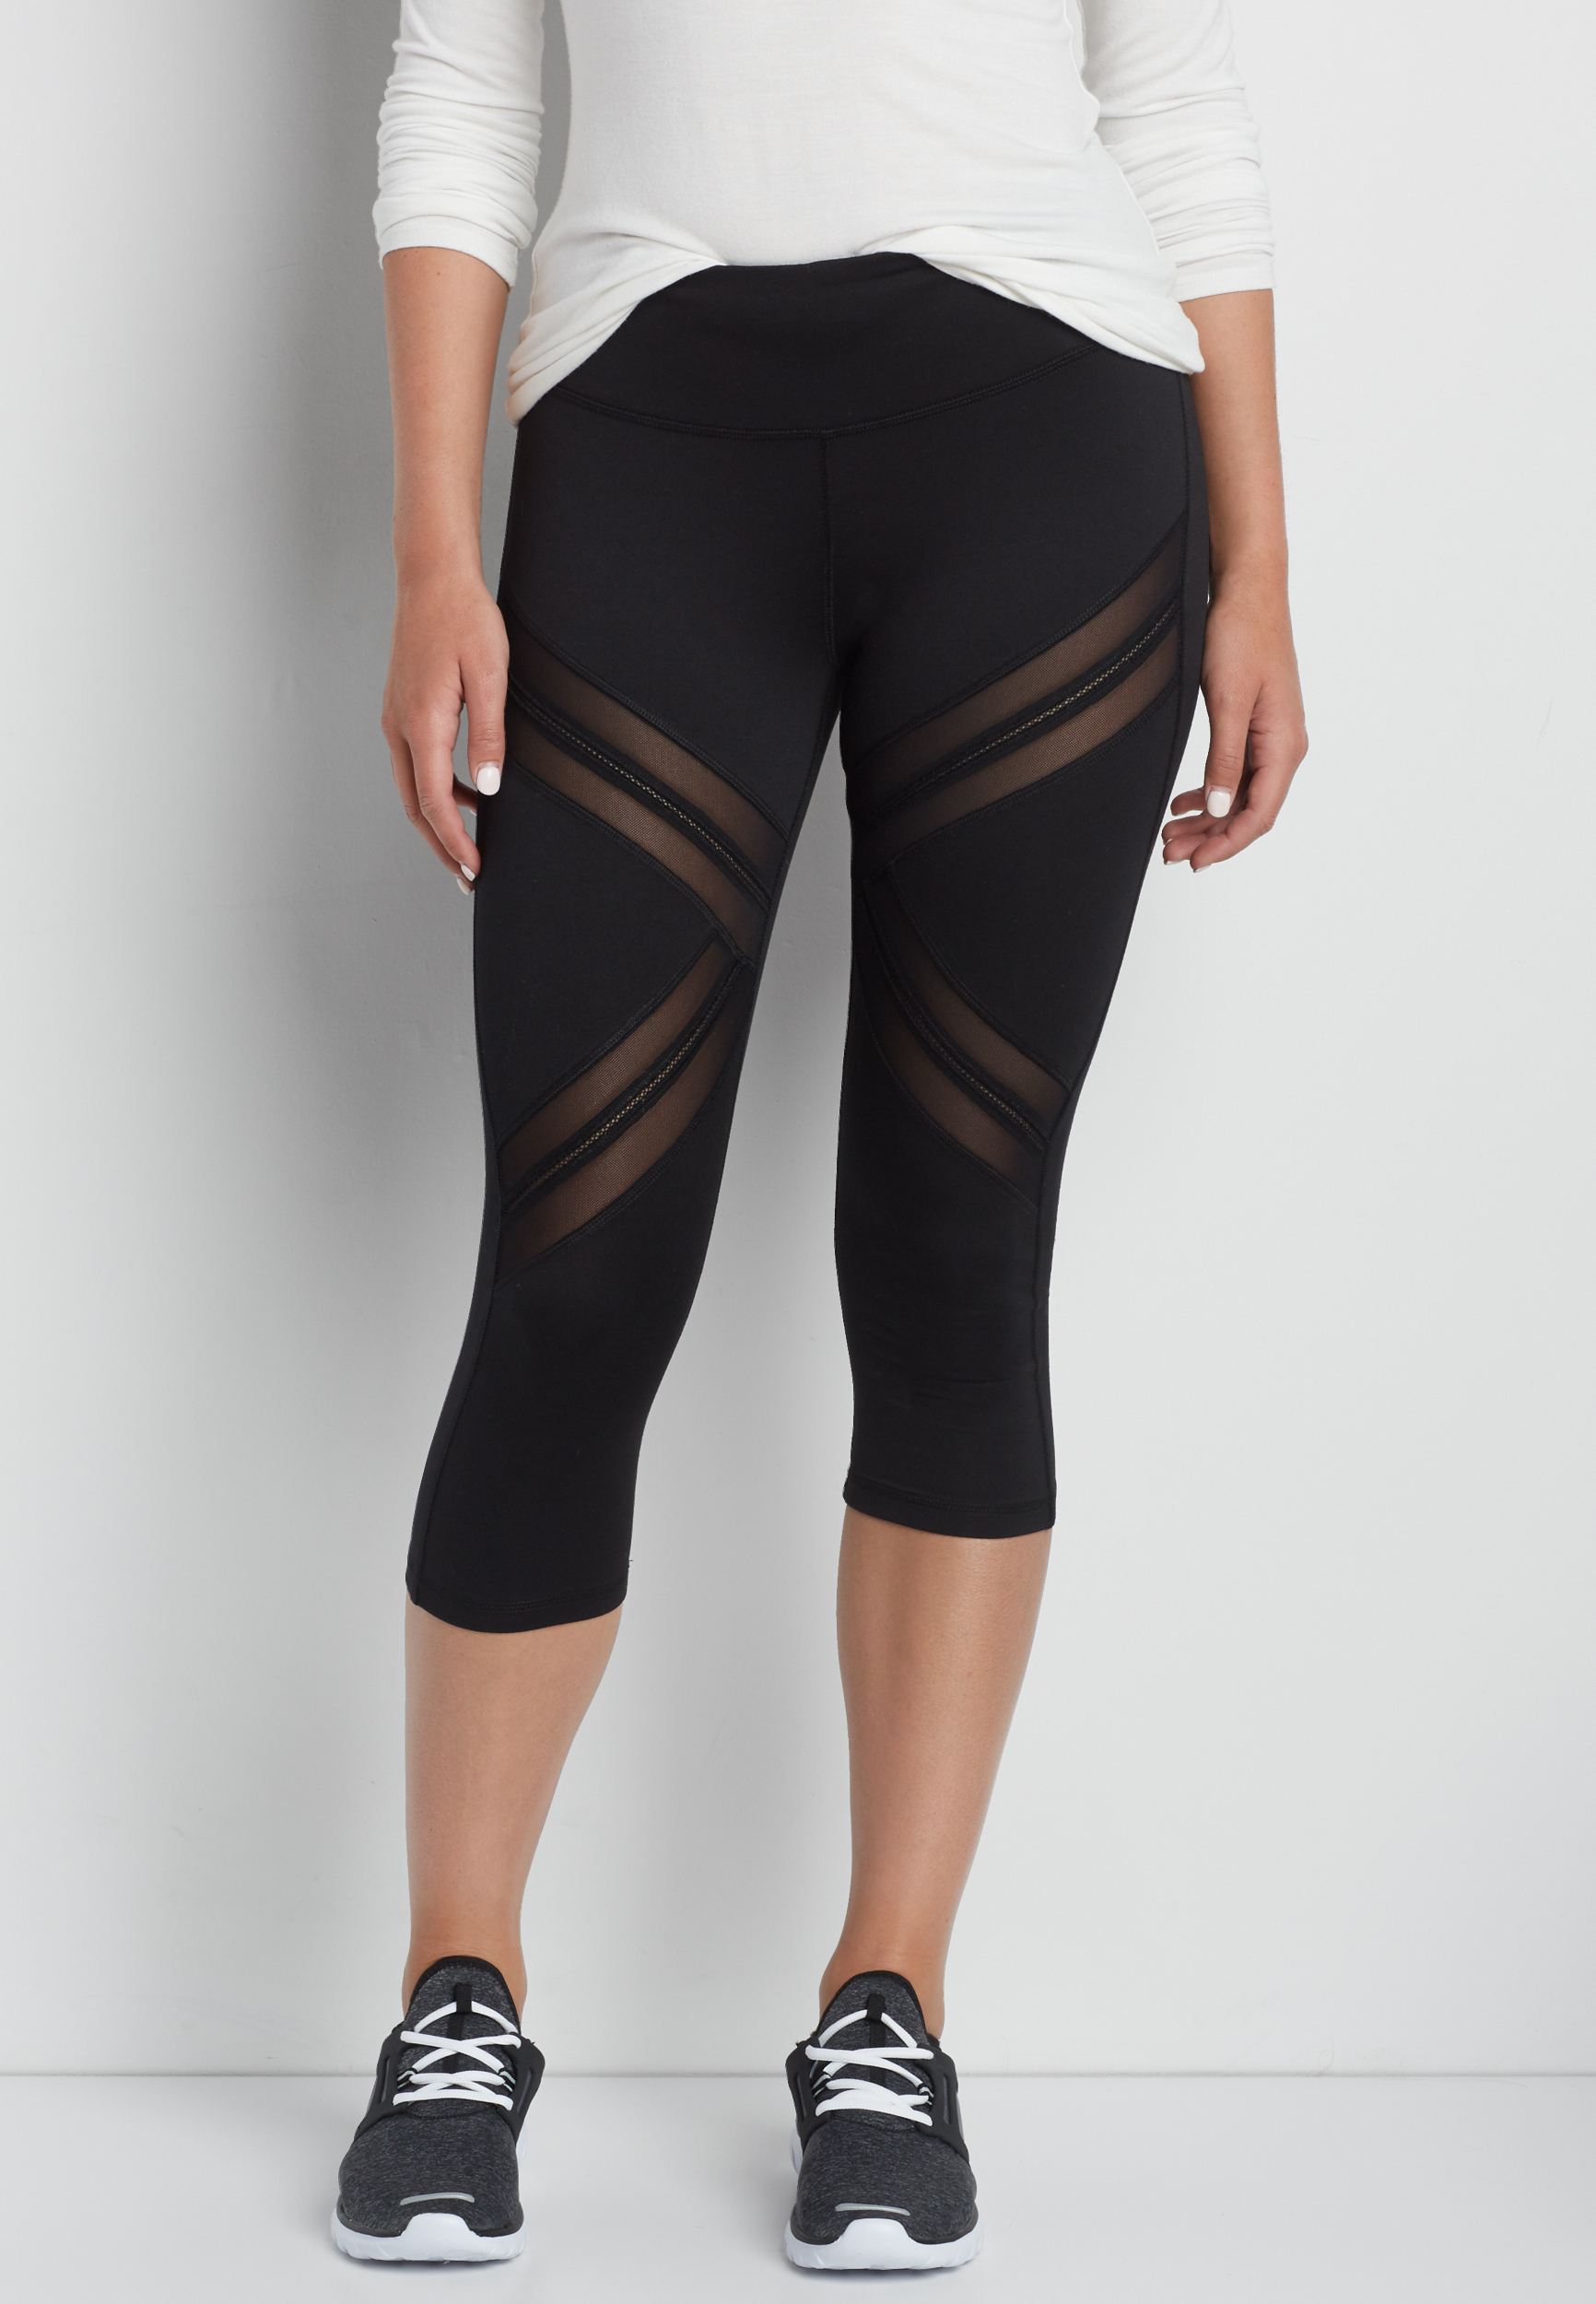 capri legging with mesh inlay | maurices